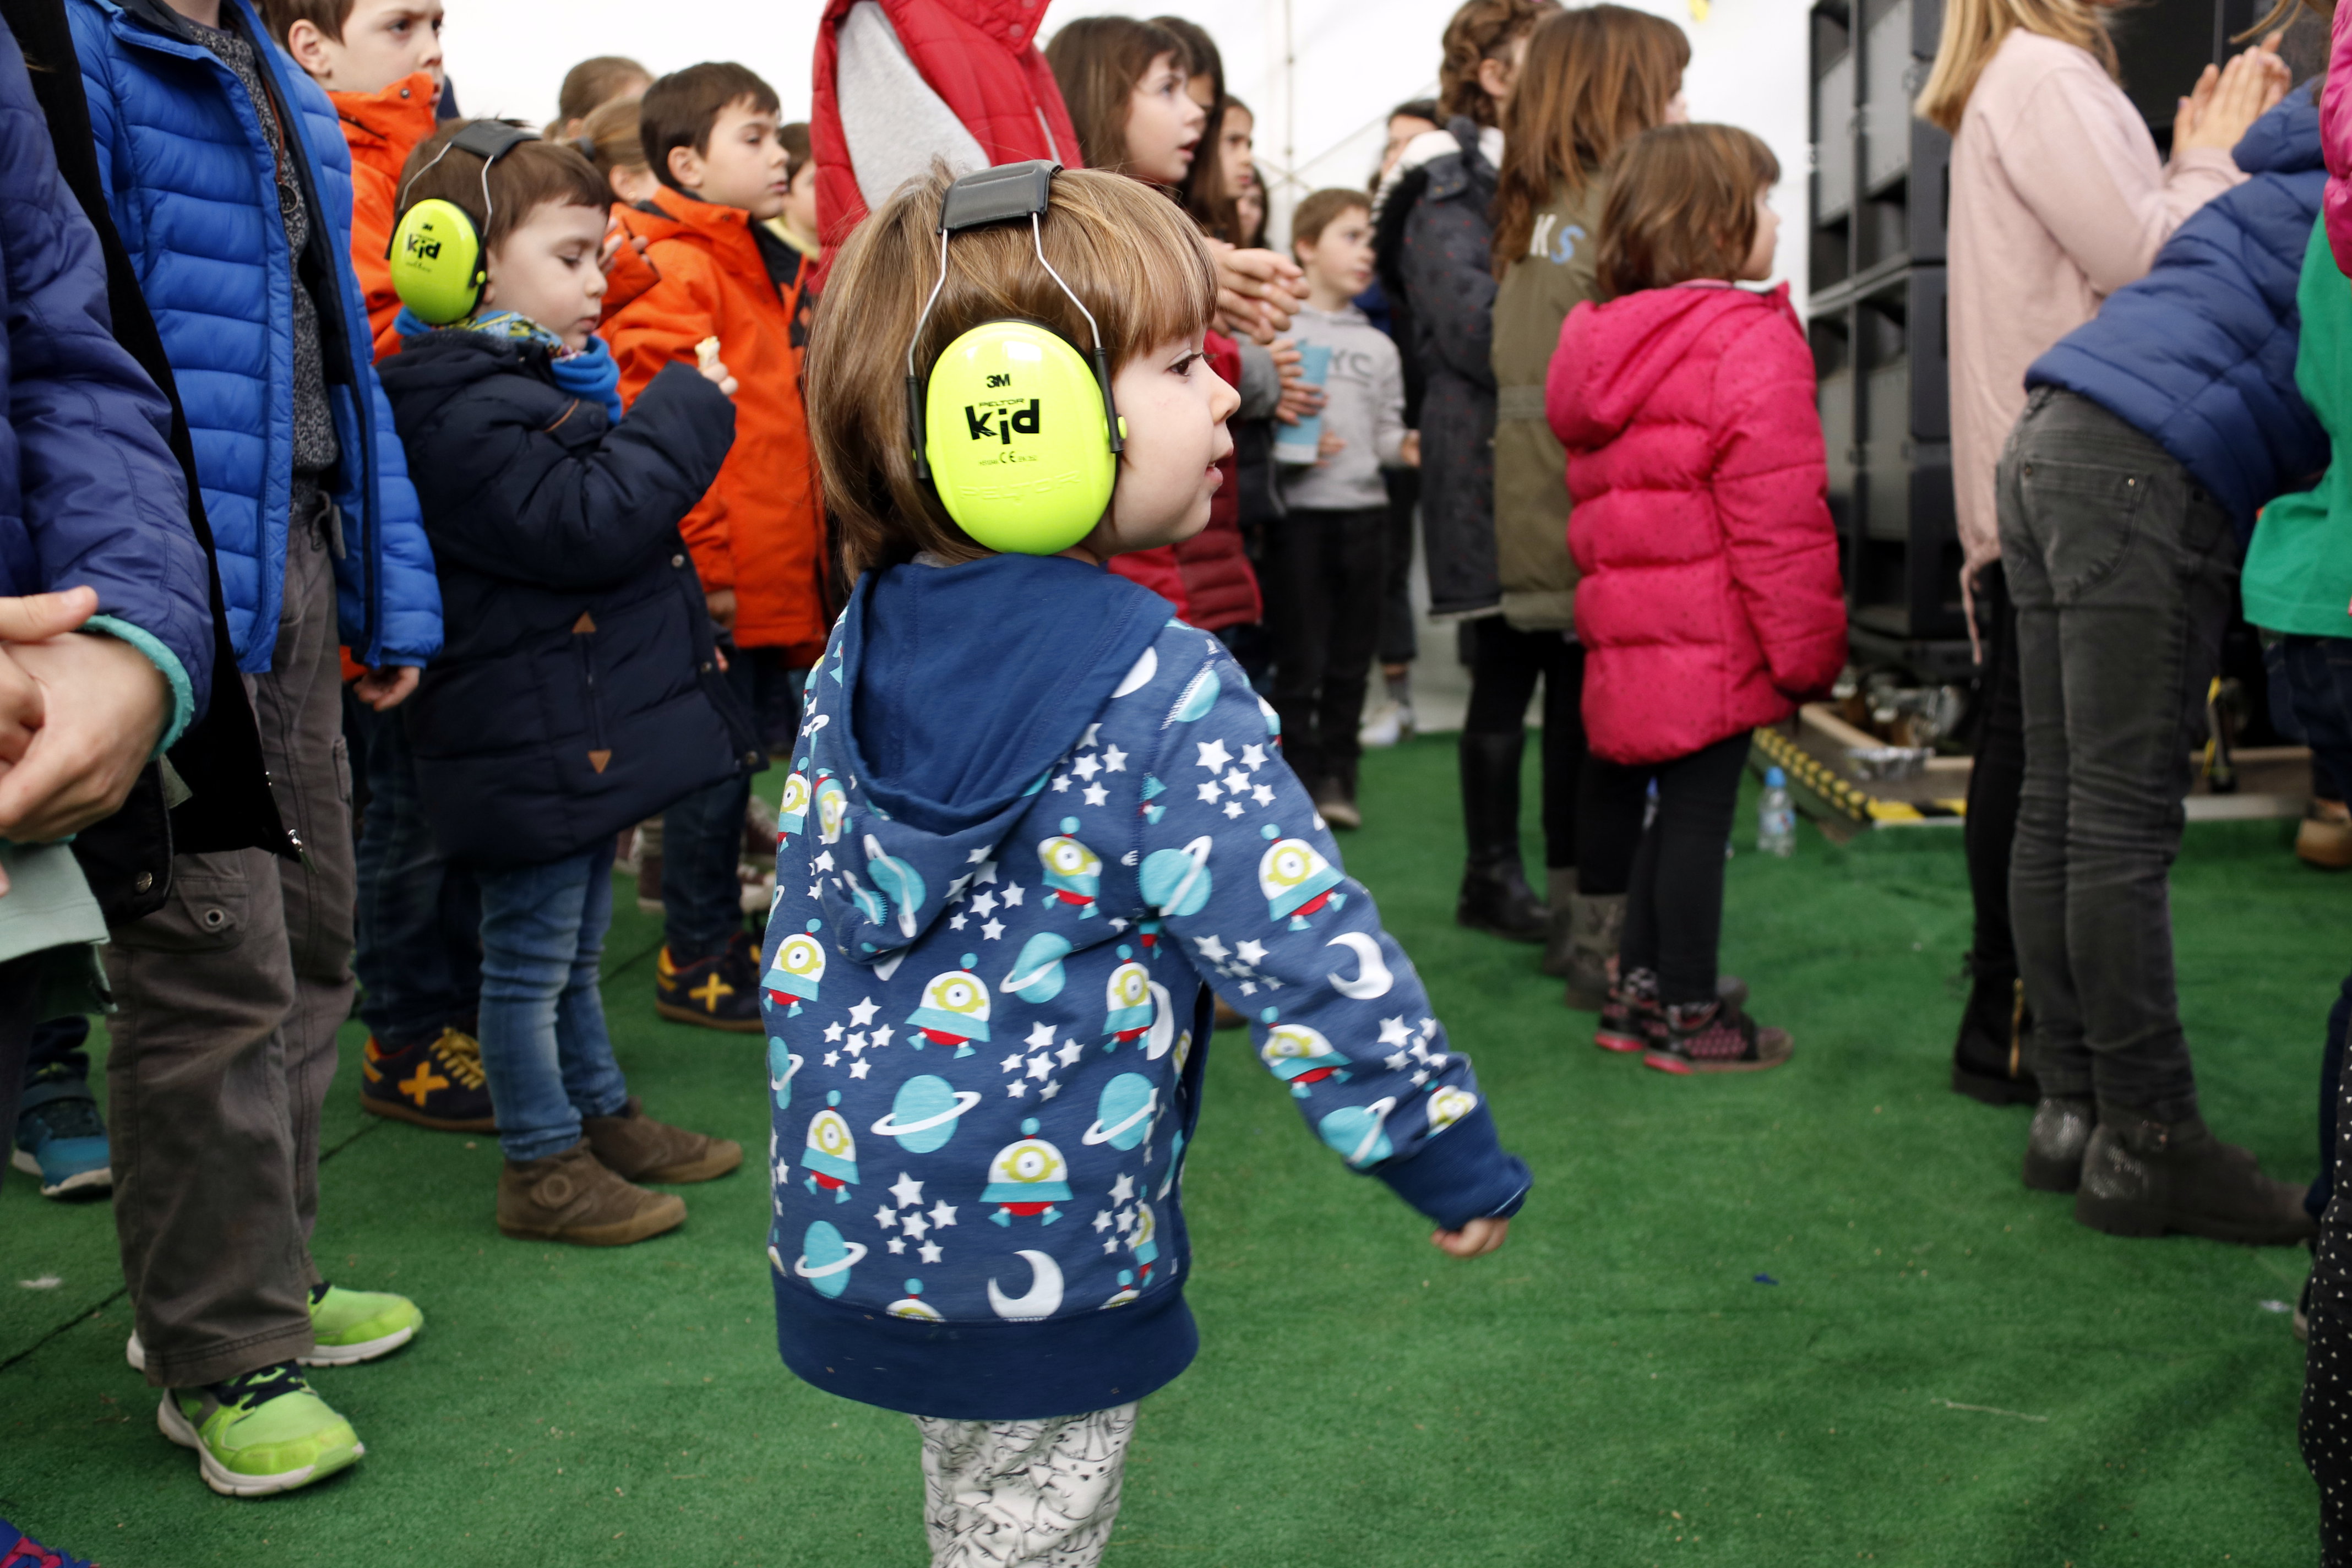 A little girl dances with headphones during the Petits Camaleons festival on February 18 2018 (by Mar Martí)